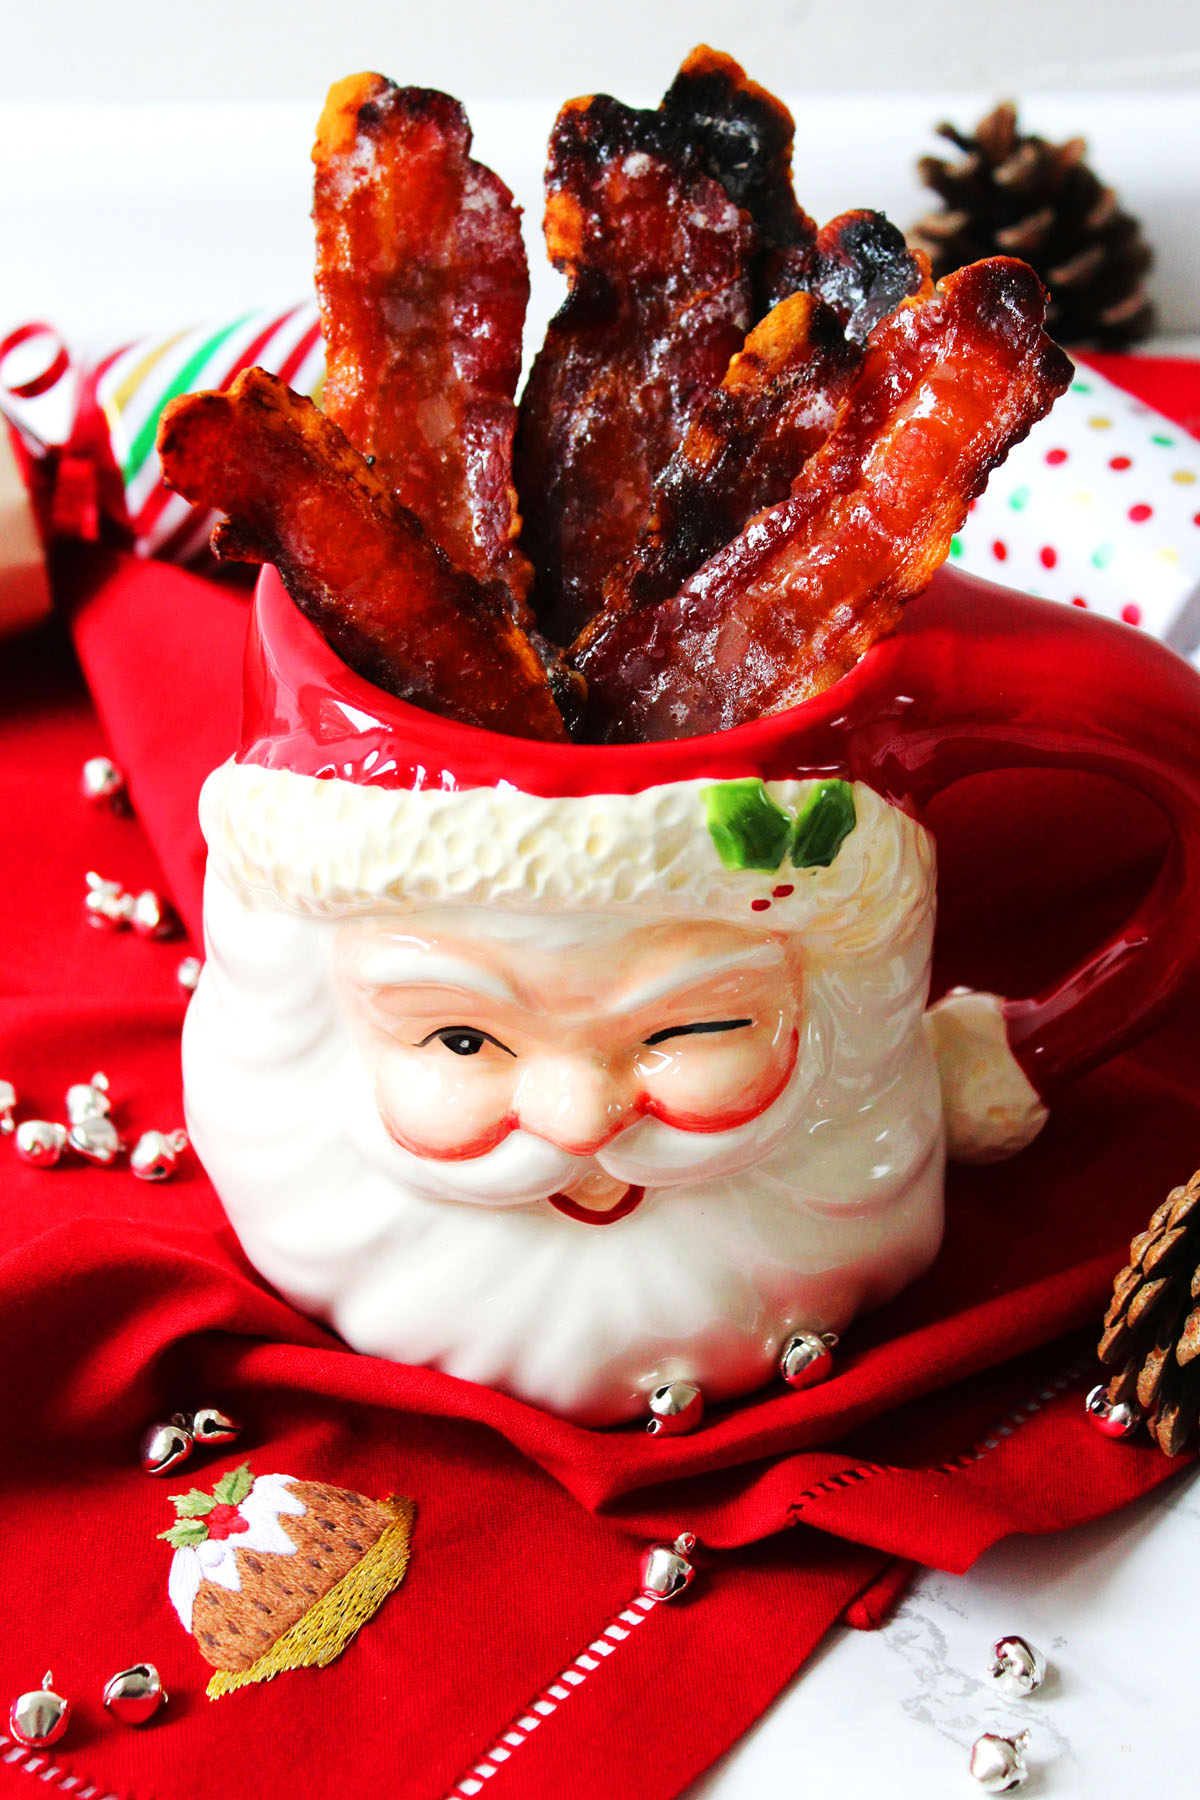 Cinnamon Candied Bacon is the perfect festive appetizer. Serve with cocktails and other canapes at your Christmas party. Get the recipe at Supper in the Suburbs!